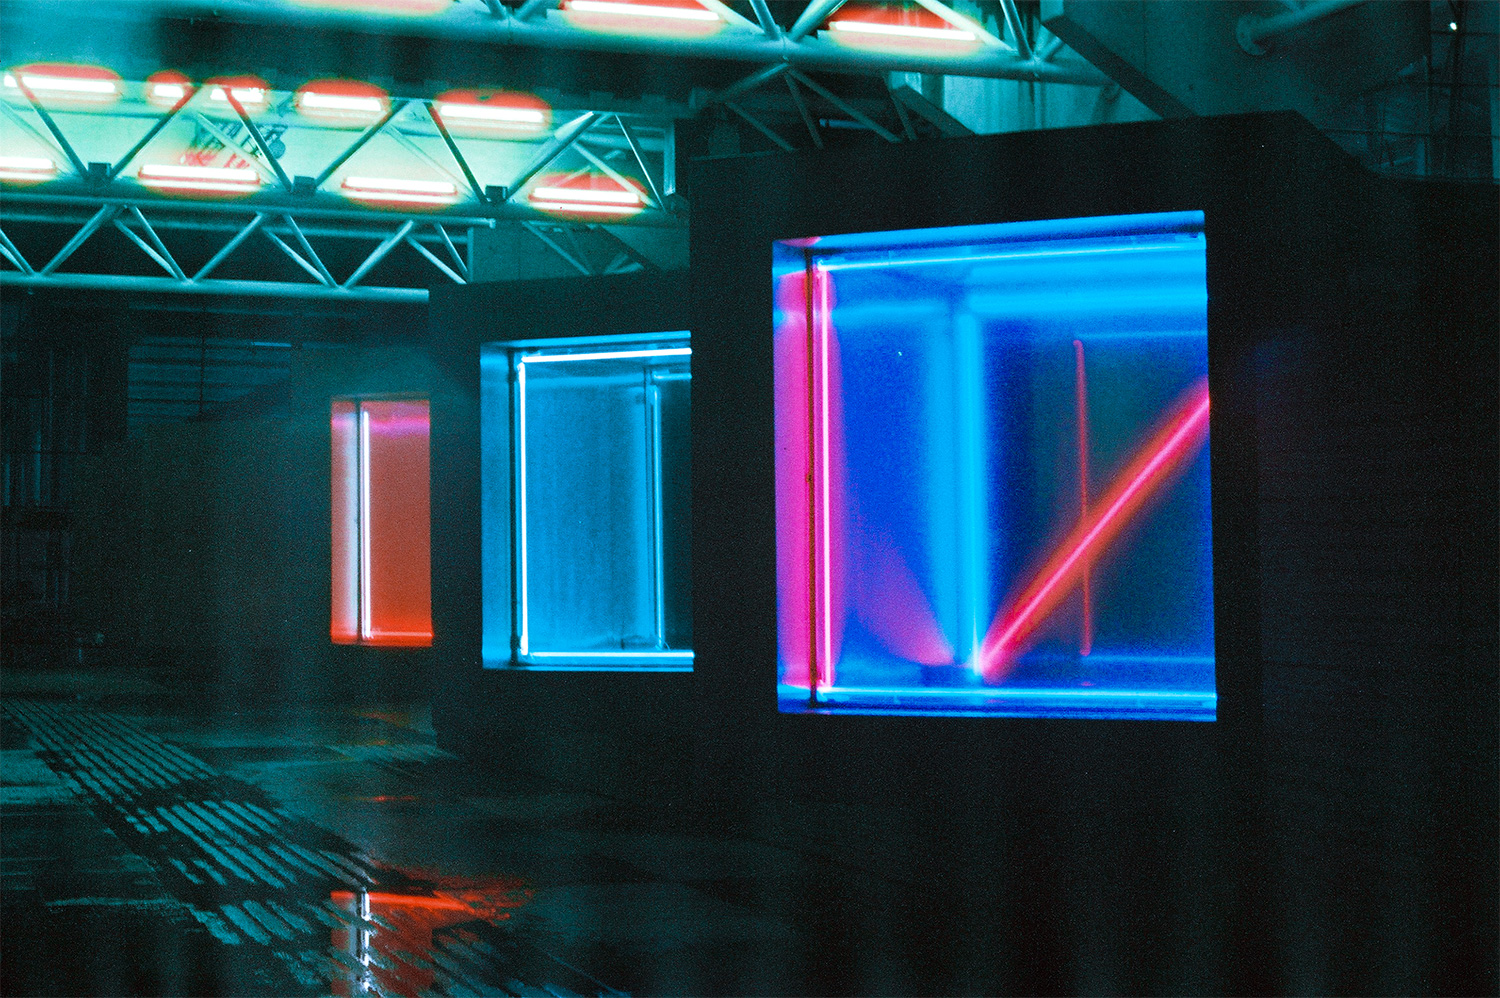 Analog photo of an art installation with neon lights at night.